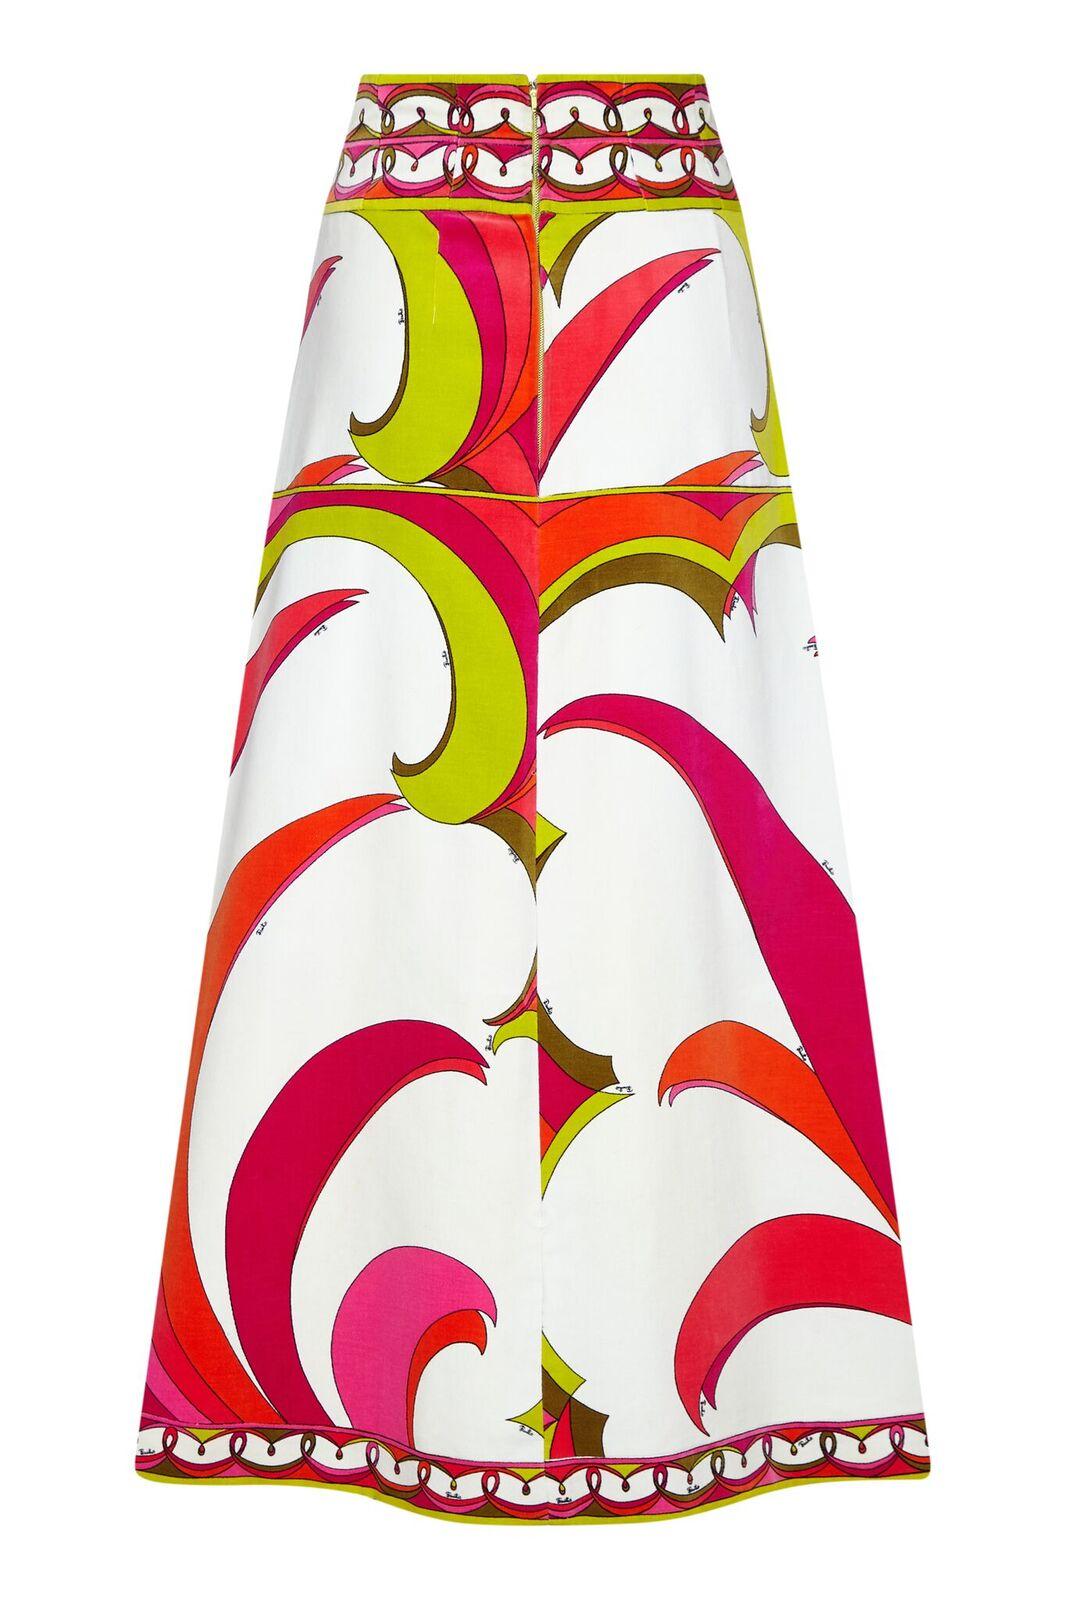 This amazing 1970s velvet A-line maxi skirt by Pucci is in impeccable vintage condition, showcasing a vibrant tropical signature print which is wonderfully bright. The vivid lime green, tangerine and fuchsia jump out impressively from the stark